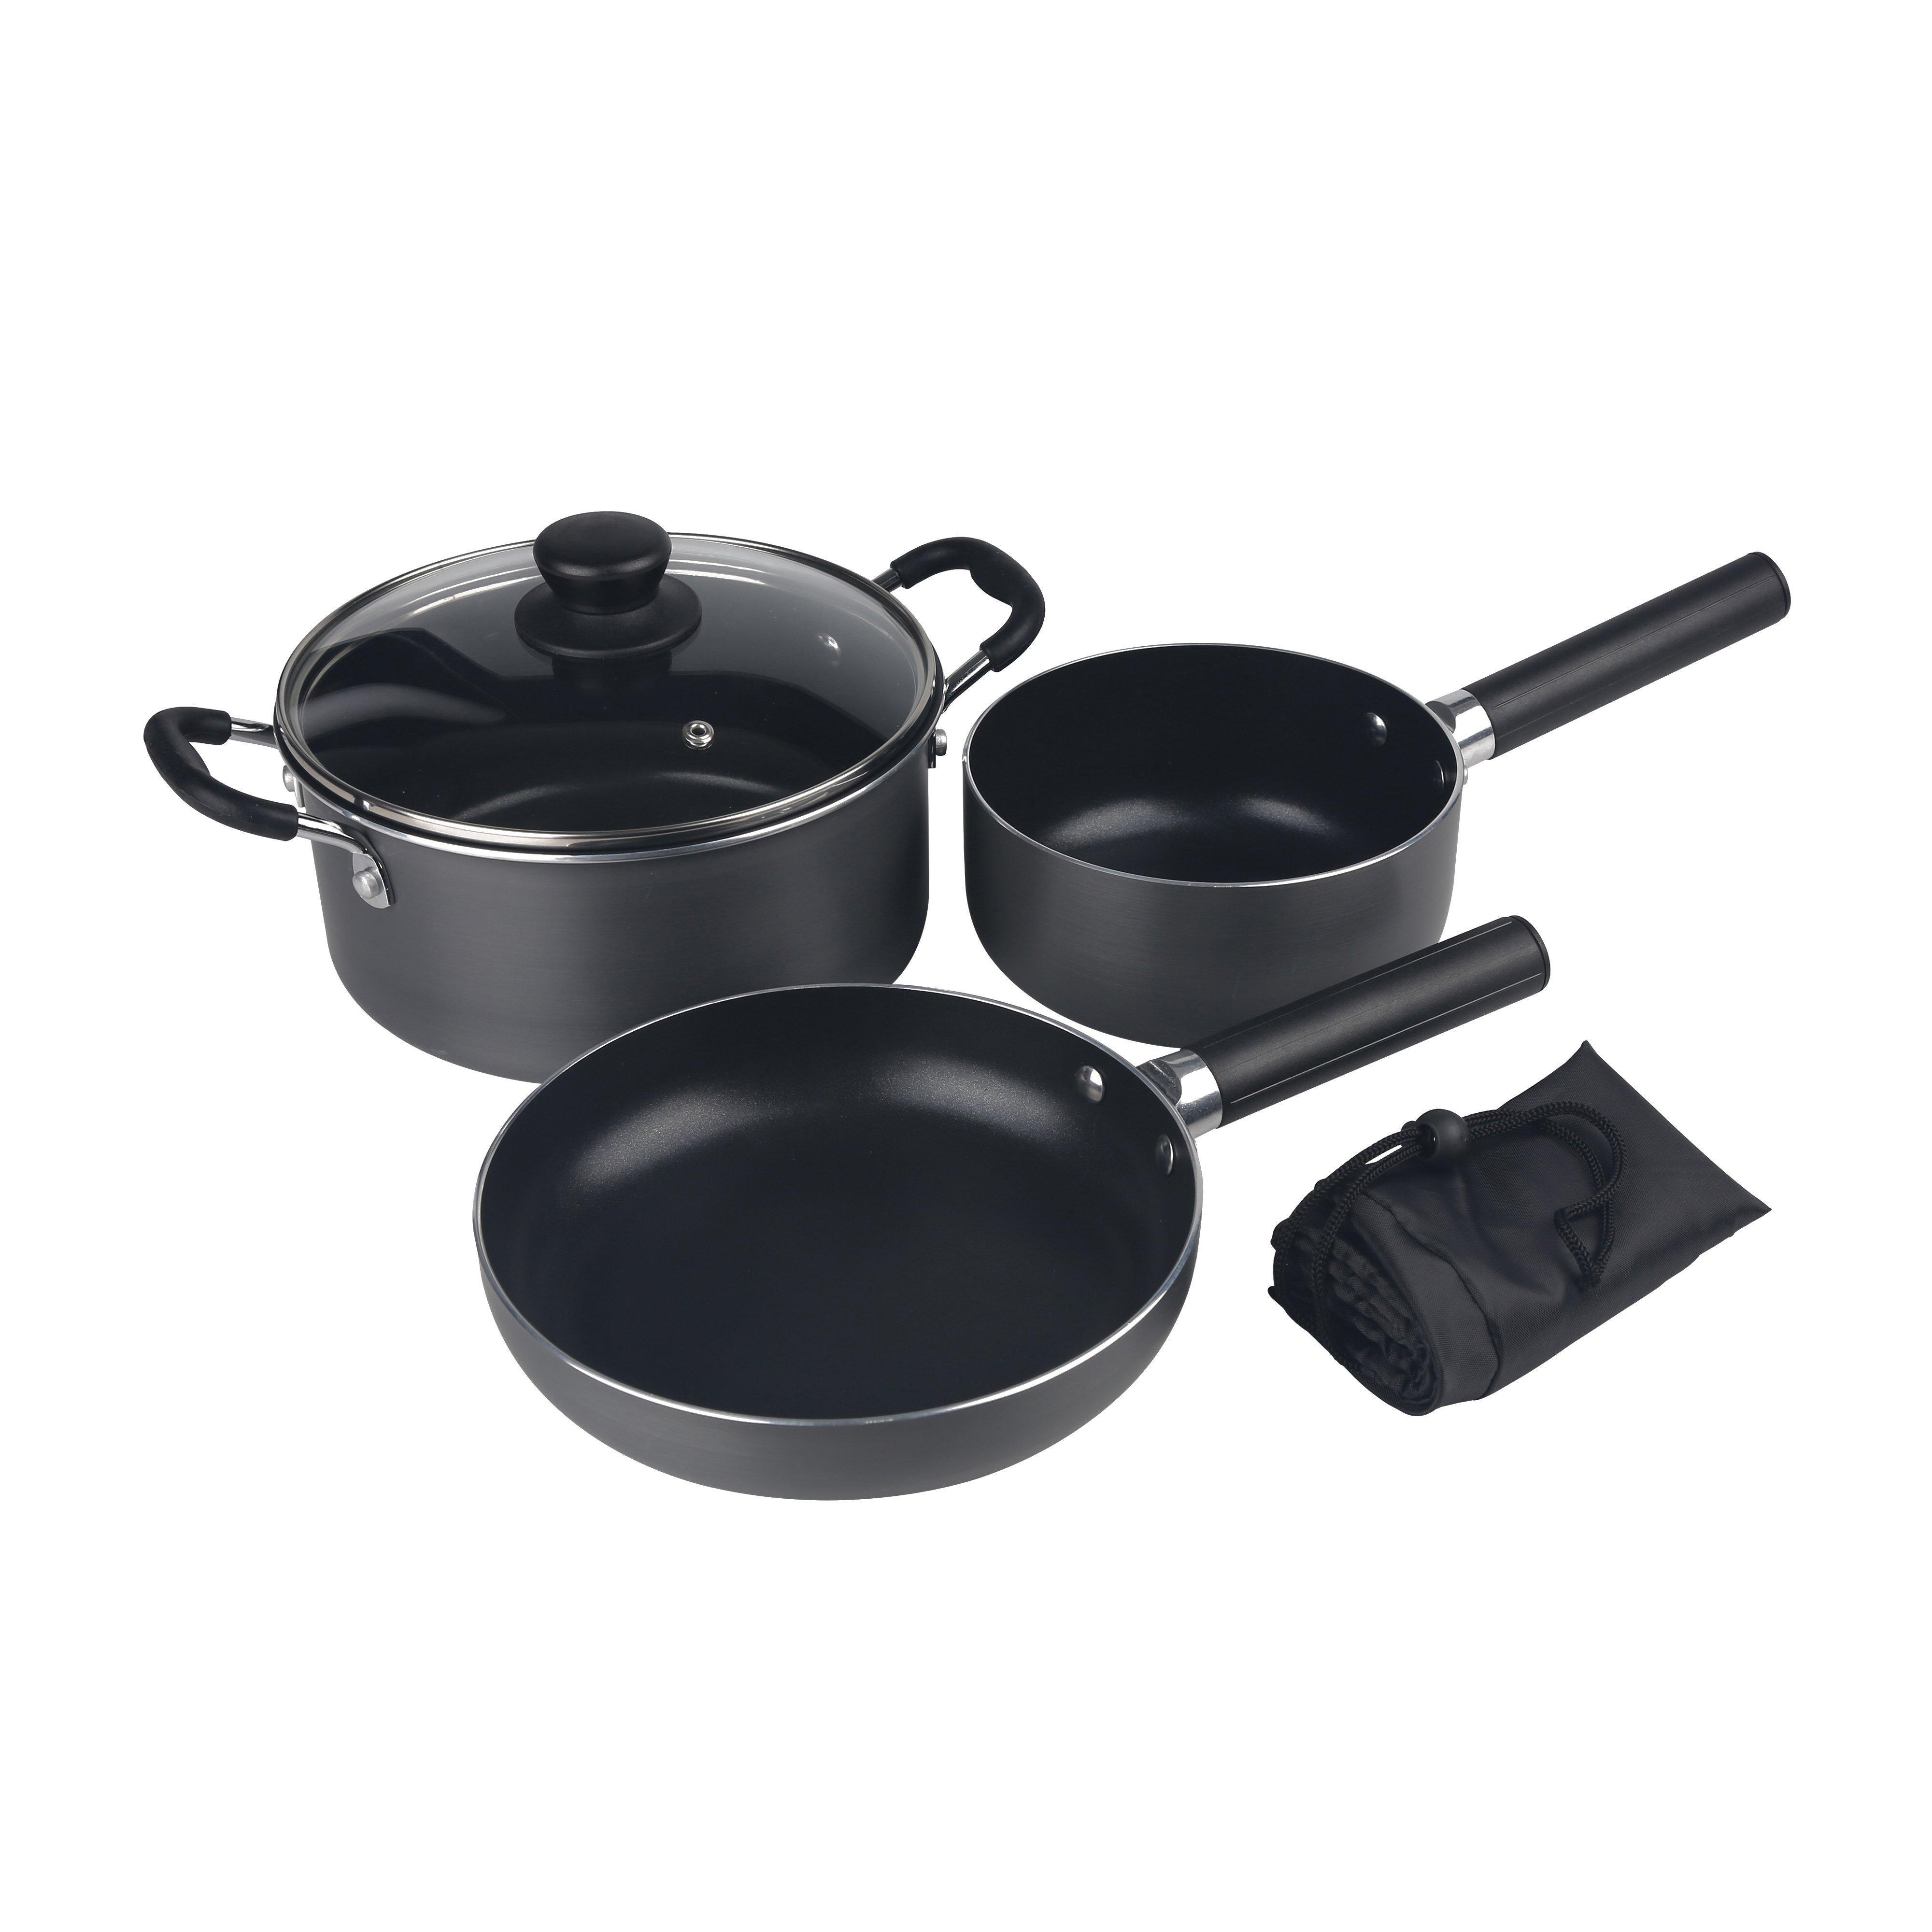 Hi-Gear Family Cookset Review